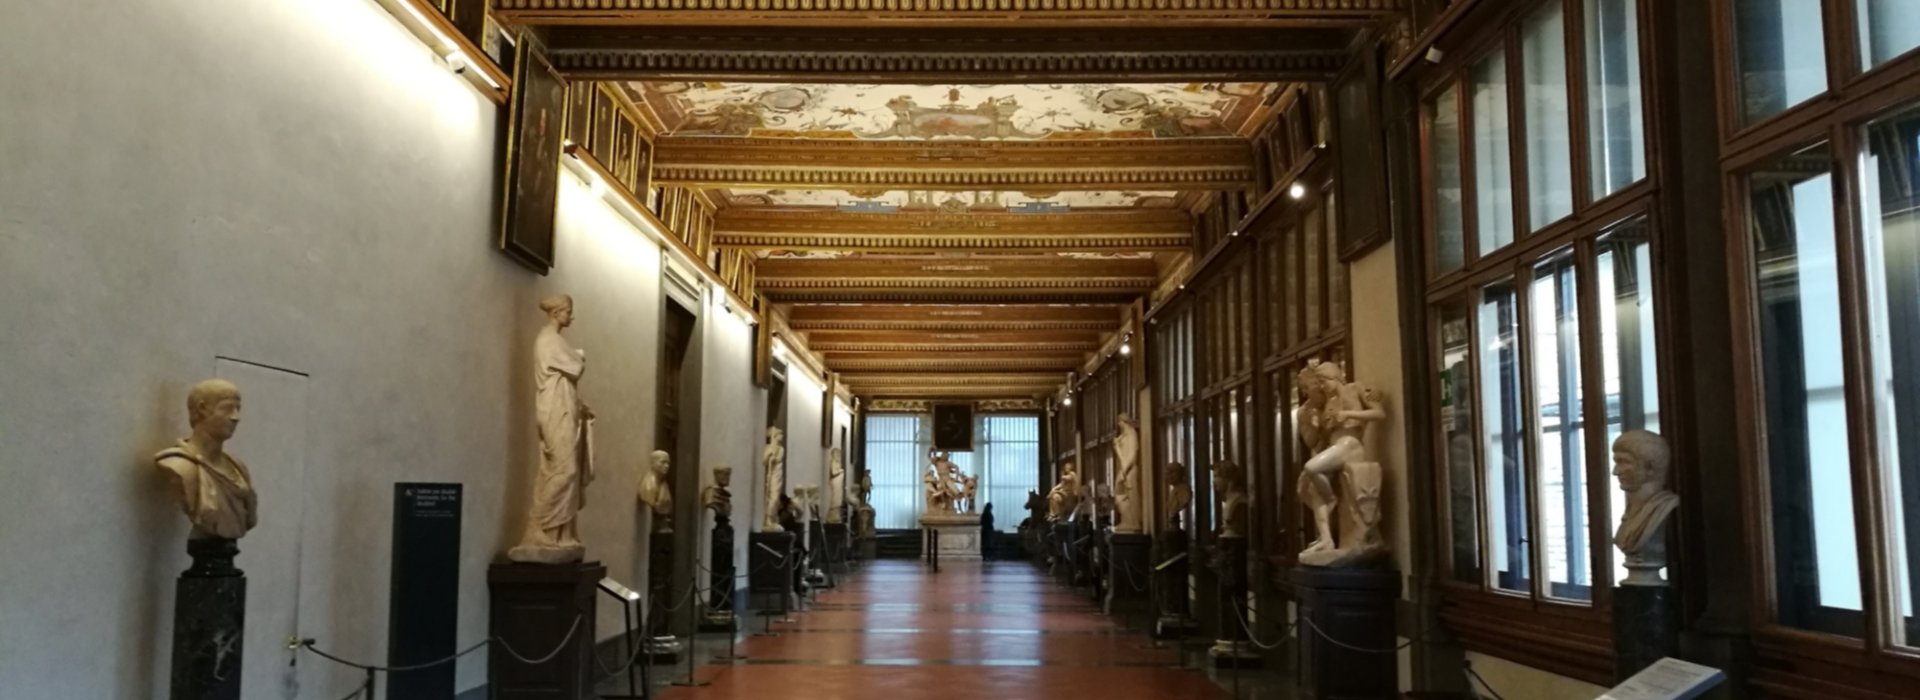 Semi-private guided tour of the Uffizi Gallery in Florence